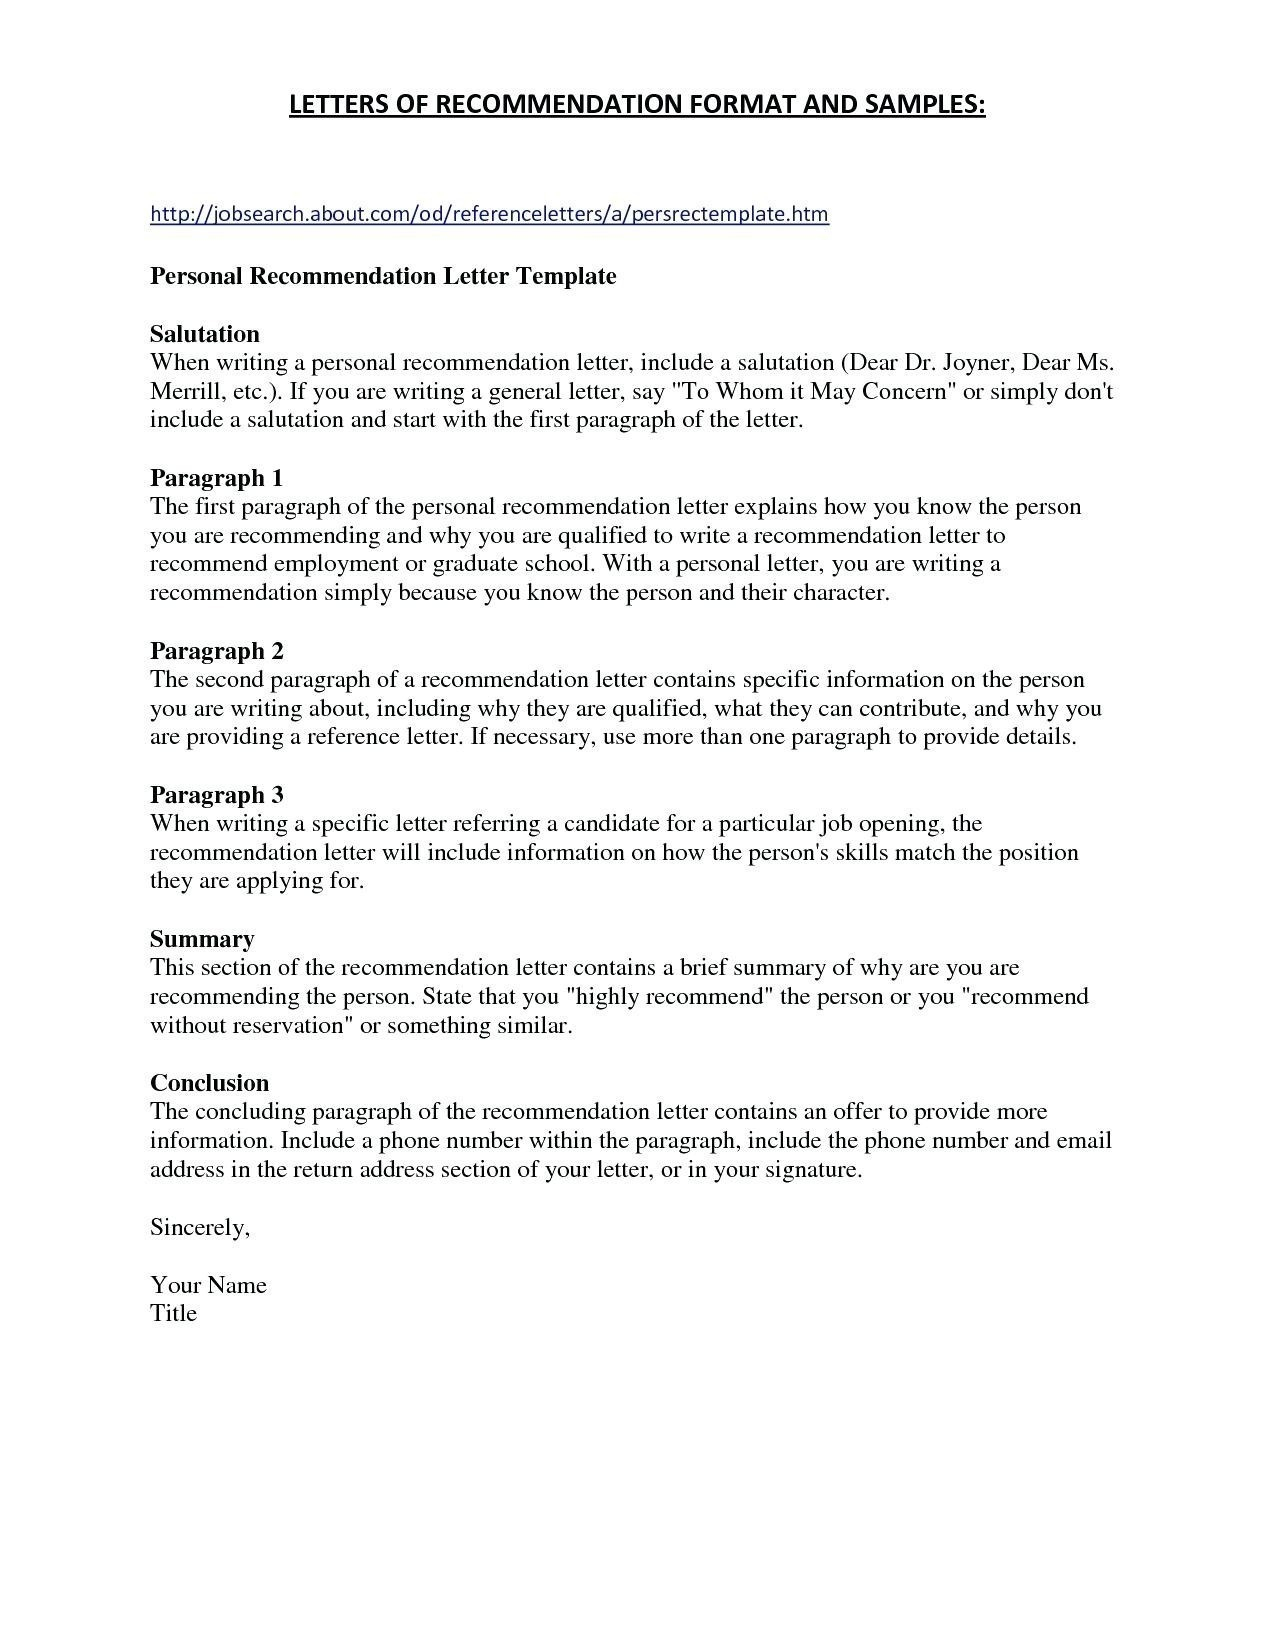 Personal Letter Of Recommendation for A Friend Template - Inspirational Re Mendation Letter for A Friend Template